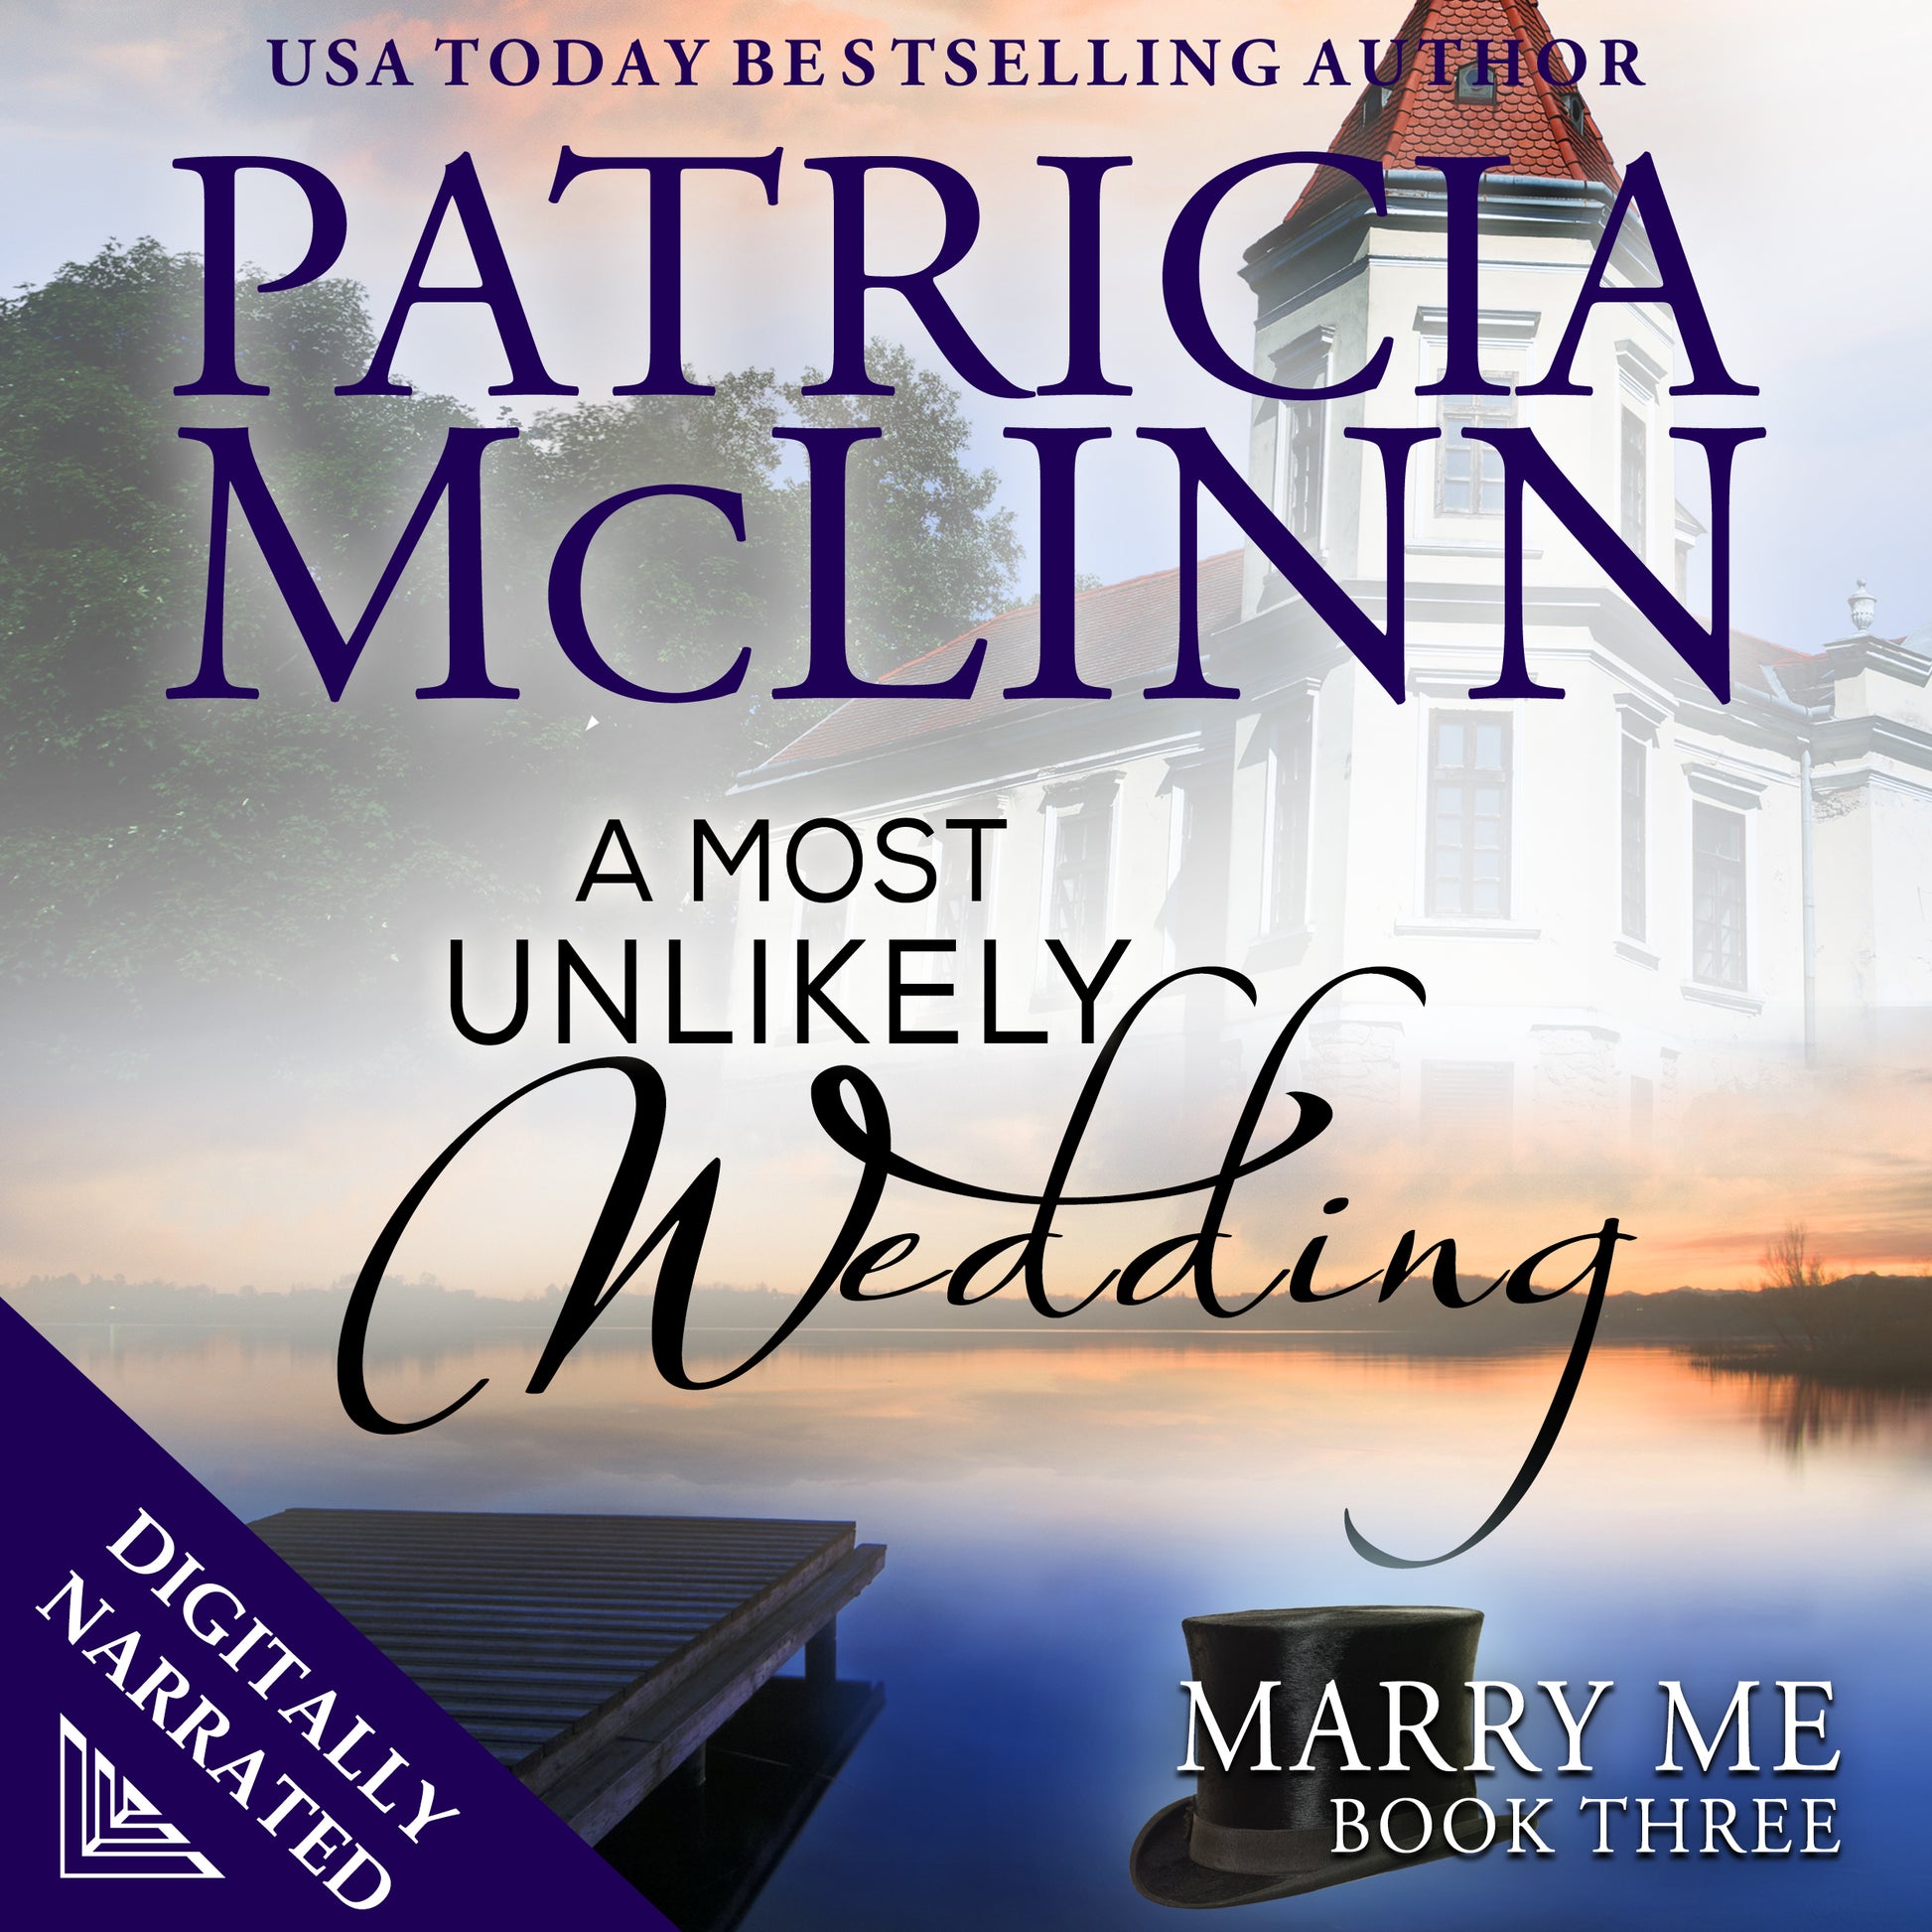 A Most Unlikely Wedding Audiobook - Patricia McLinn